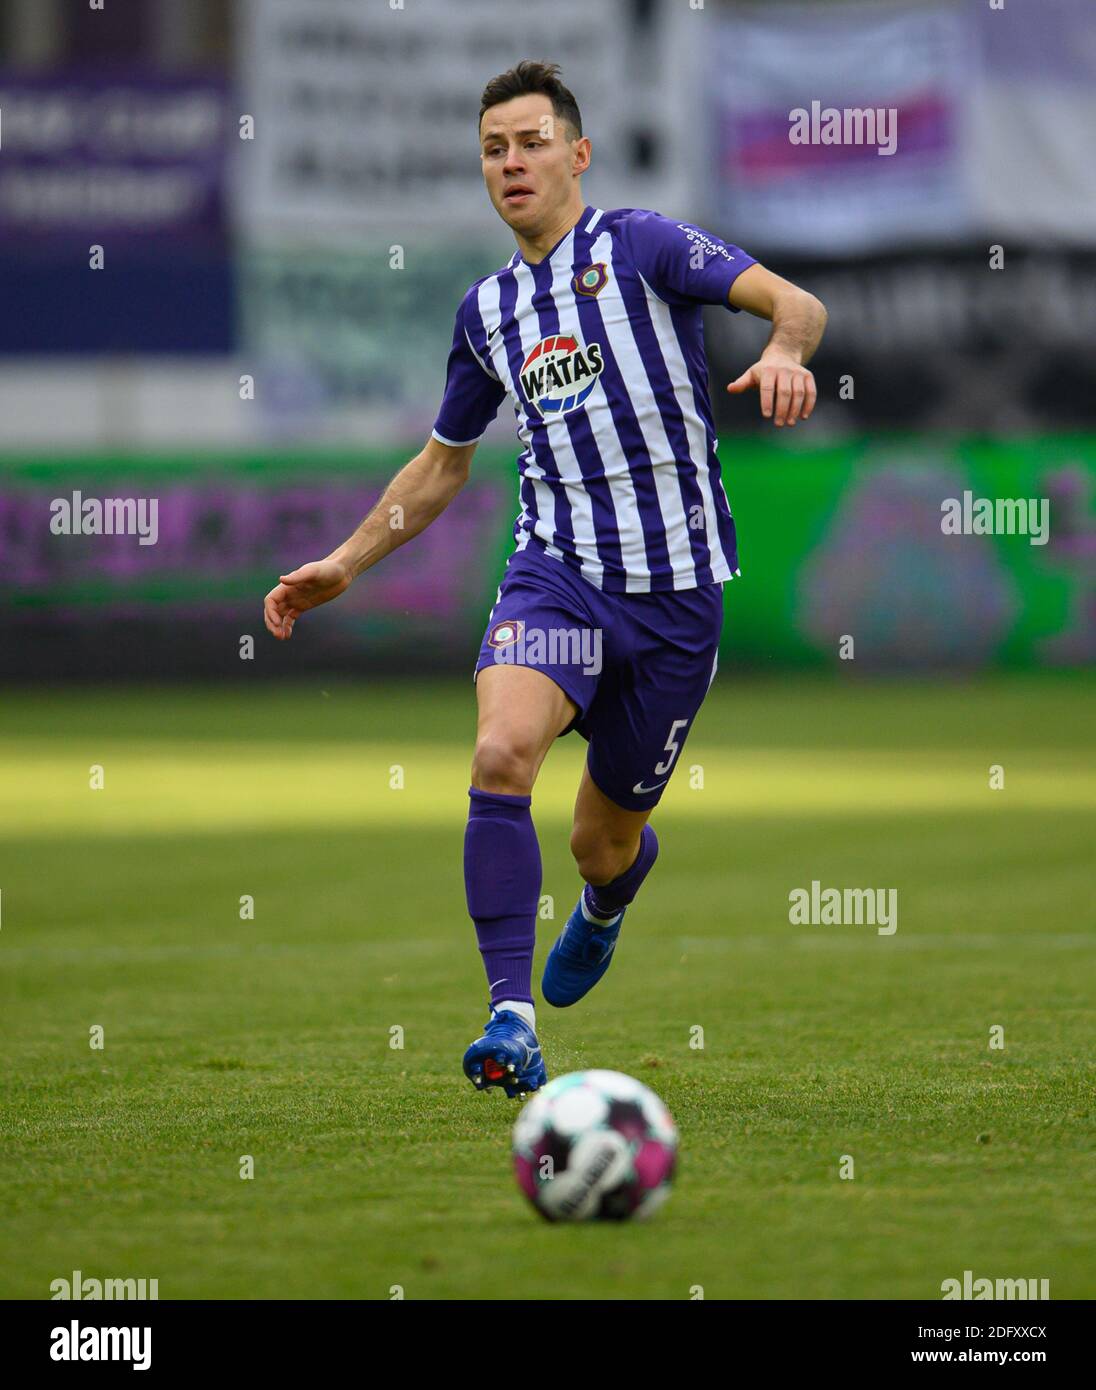 Aue, Germany. 06th Dec, 2020. Football: 2nd Bundesliga, FC Erzgebirge Aue - SSV Jahn Regensburg, 10th day of play, at the Erzgebirgsstadion. Aues Clemens Fandrich plays the ball. Credit: Robert Michael/dpa-Zentralbild/dpa - IMPORTANT NOTE: In accordance with the regulations of the DFL Deutsche Fußball Liga and the DFB Deutscher Fußball-Bund, it is prohibited to exploit or have exploited in the stadium and/or from the game taken photographs in the form of sequence images and/or video-like photo series./dpa/Alamy Live News Stock Photo